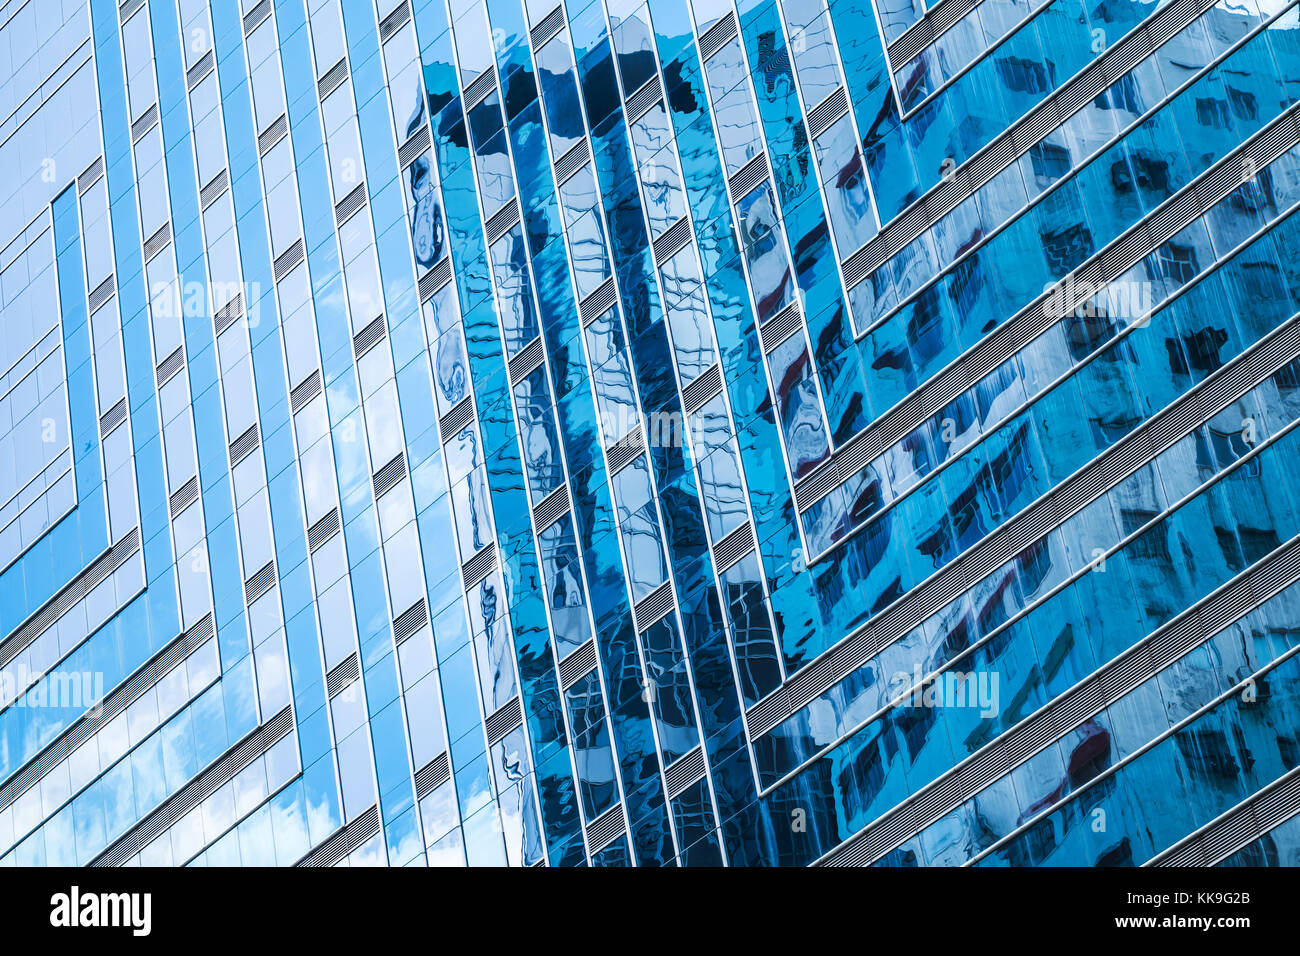 Modern architecture style. Abstract fragment, walls made of glass and steel with reflections of blue sky Stock Photo